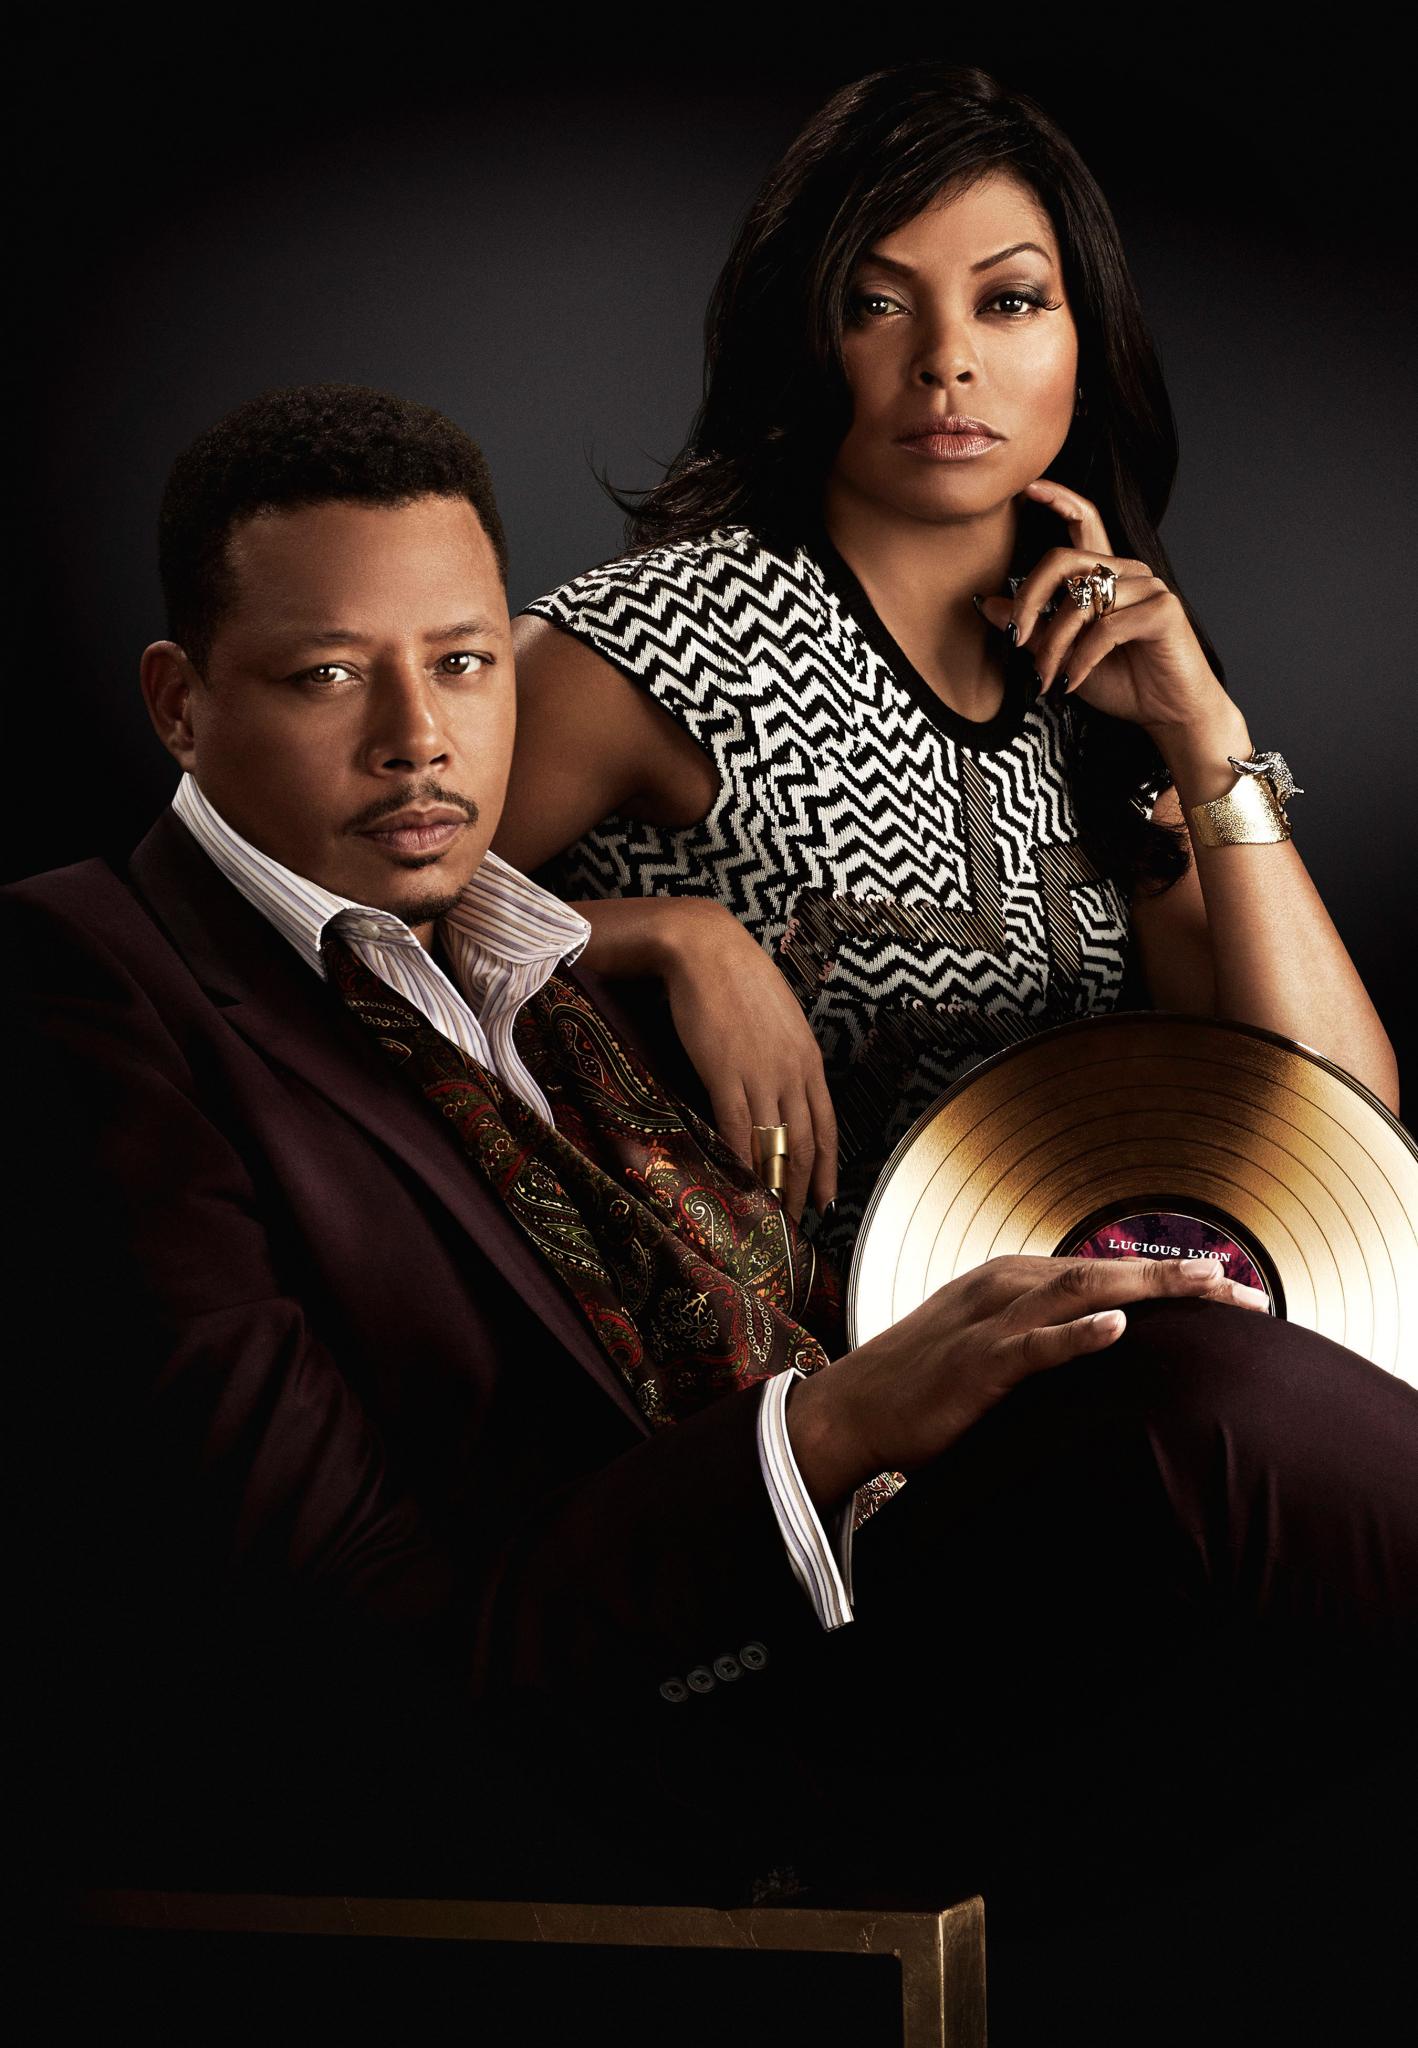 5 Reasons 'Empire' Will Be Your New TV Addiction
